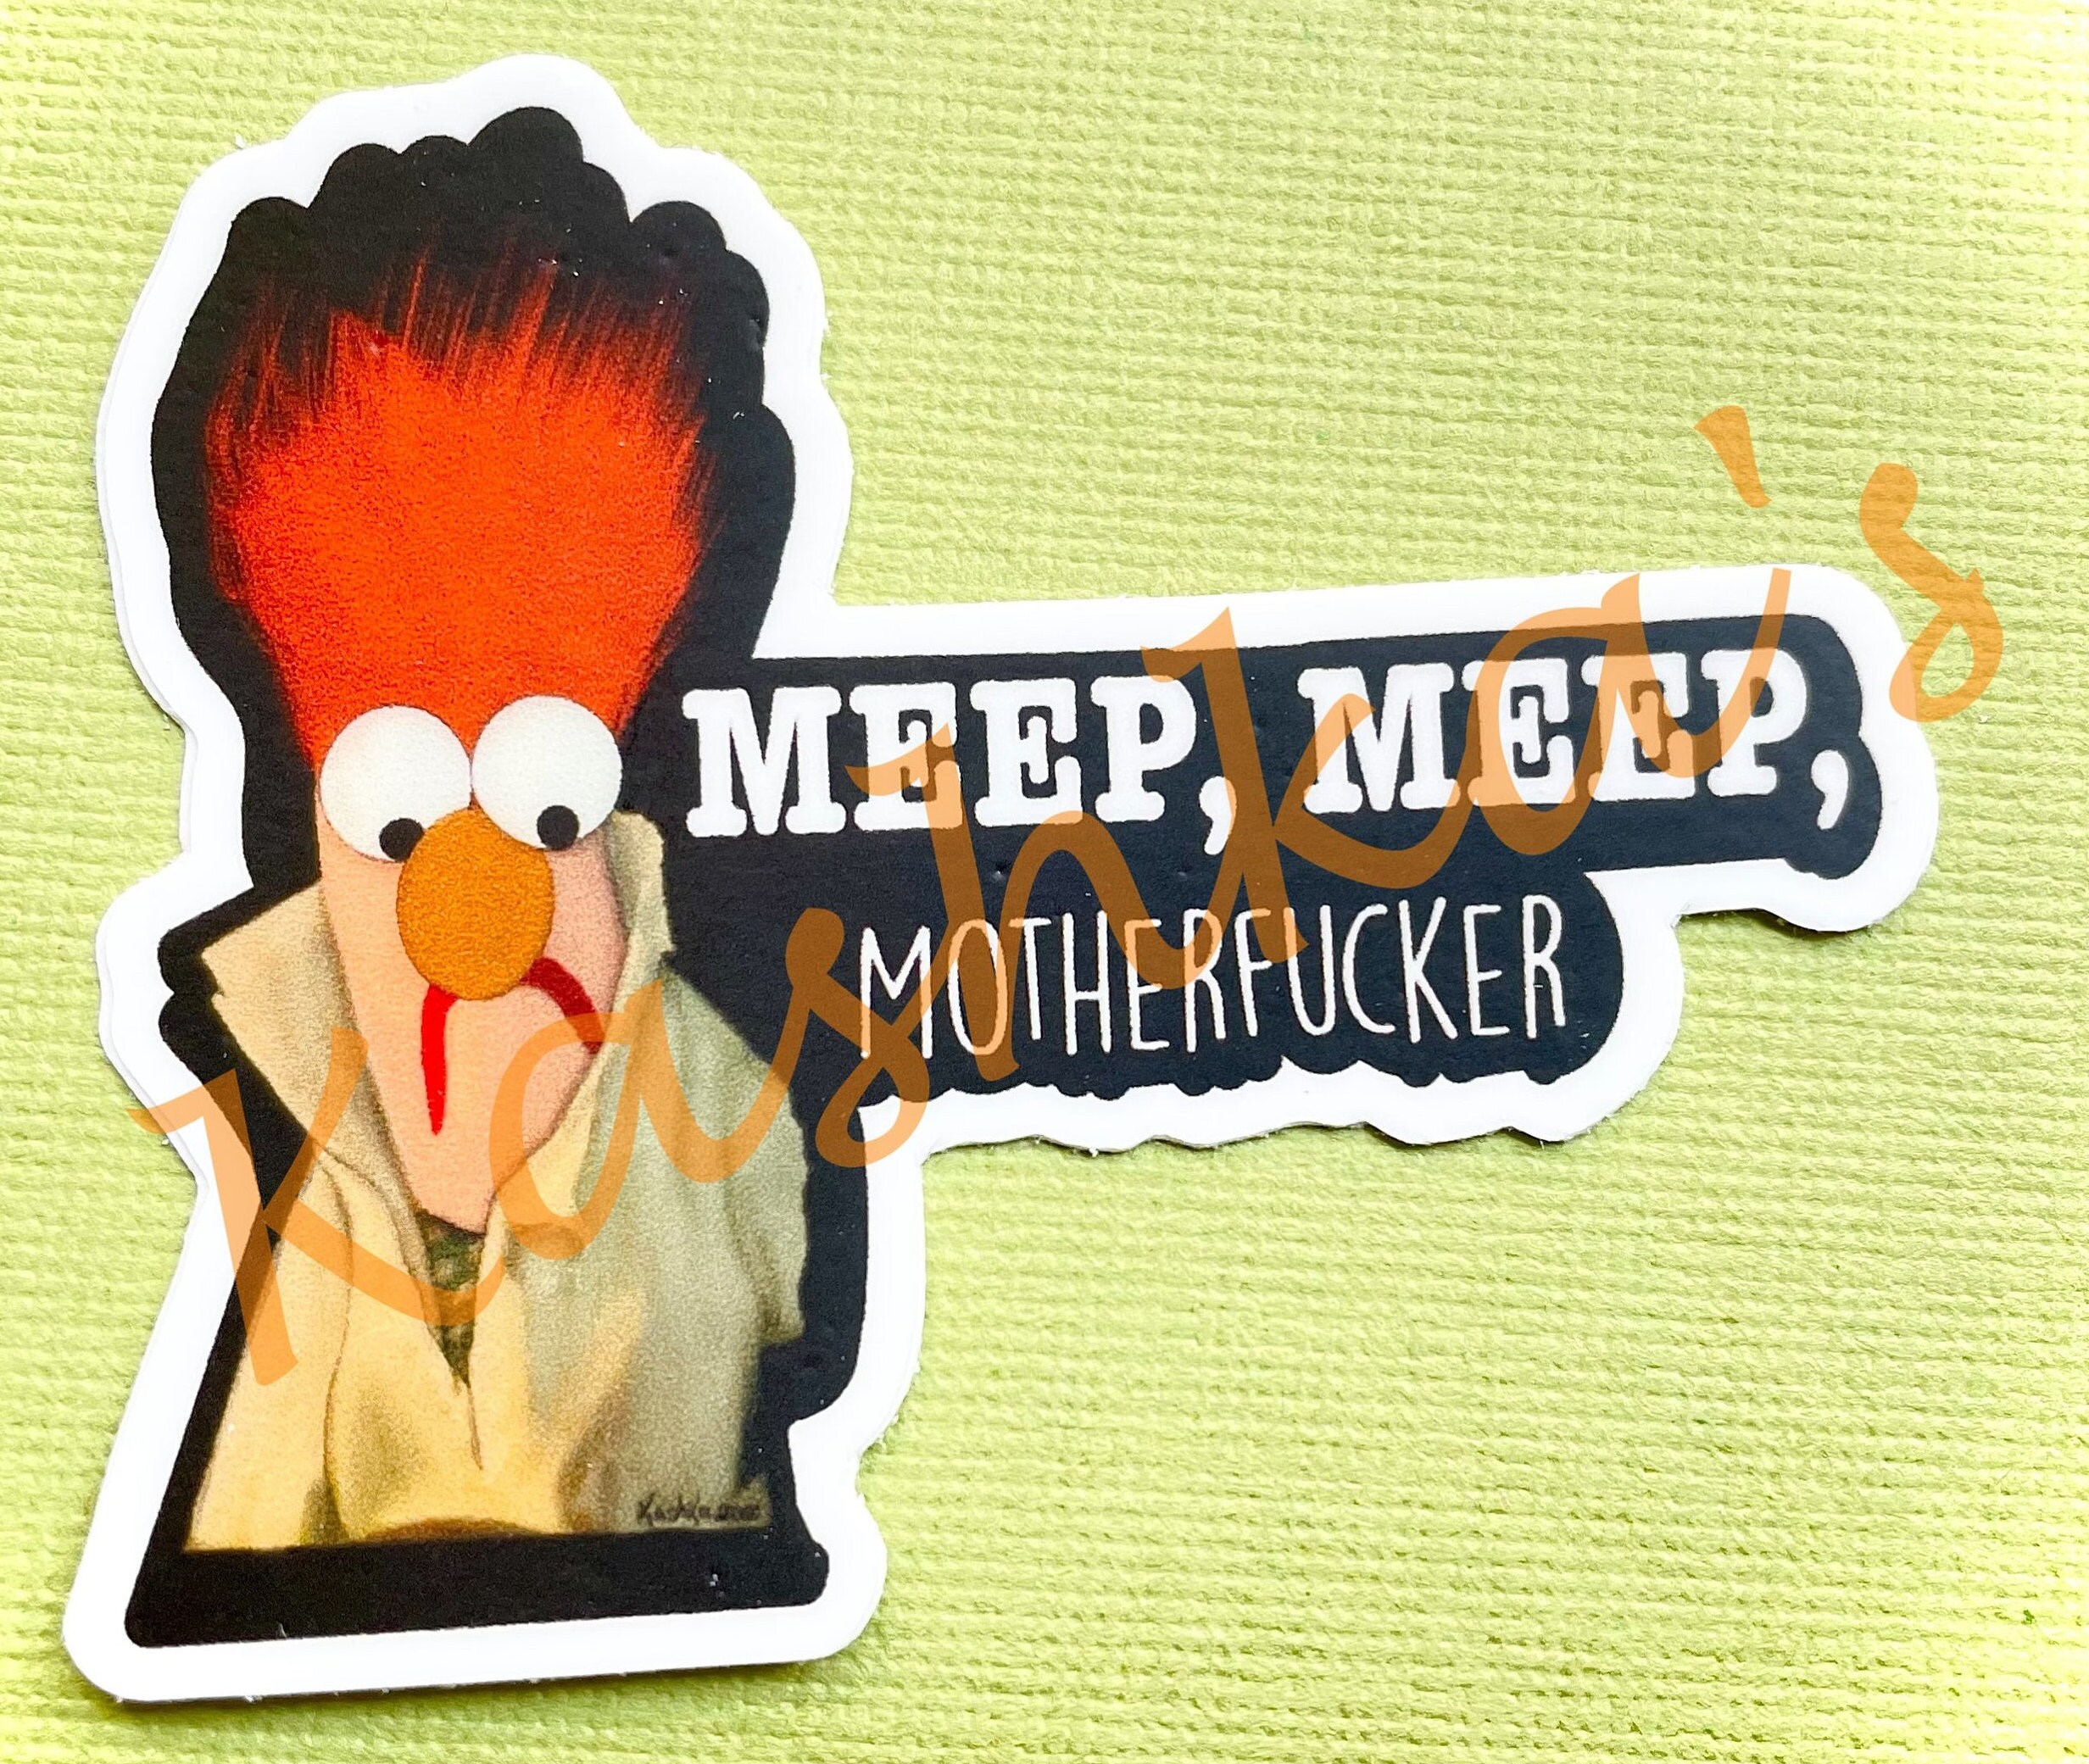 MEEP MEEP MEEP MEEP MEEEEEEEEEPPPP!!!!!!! MOTHERFUCKER!!!!! : r/THE_PACK